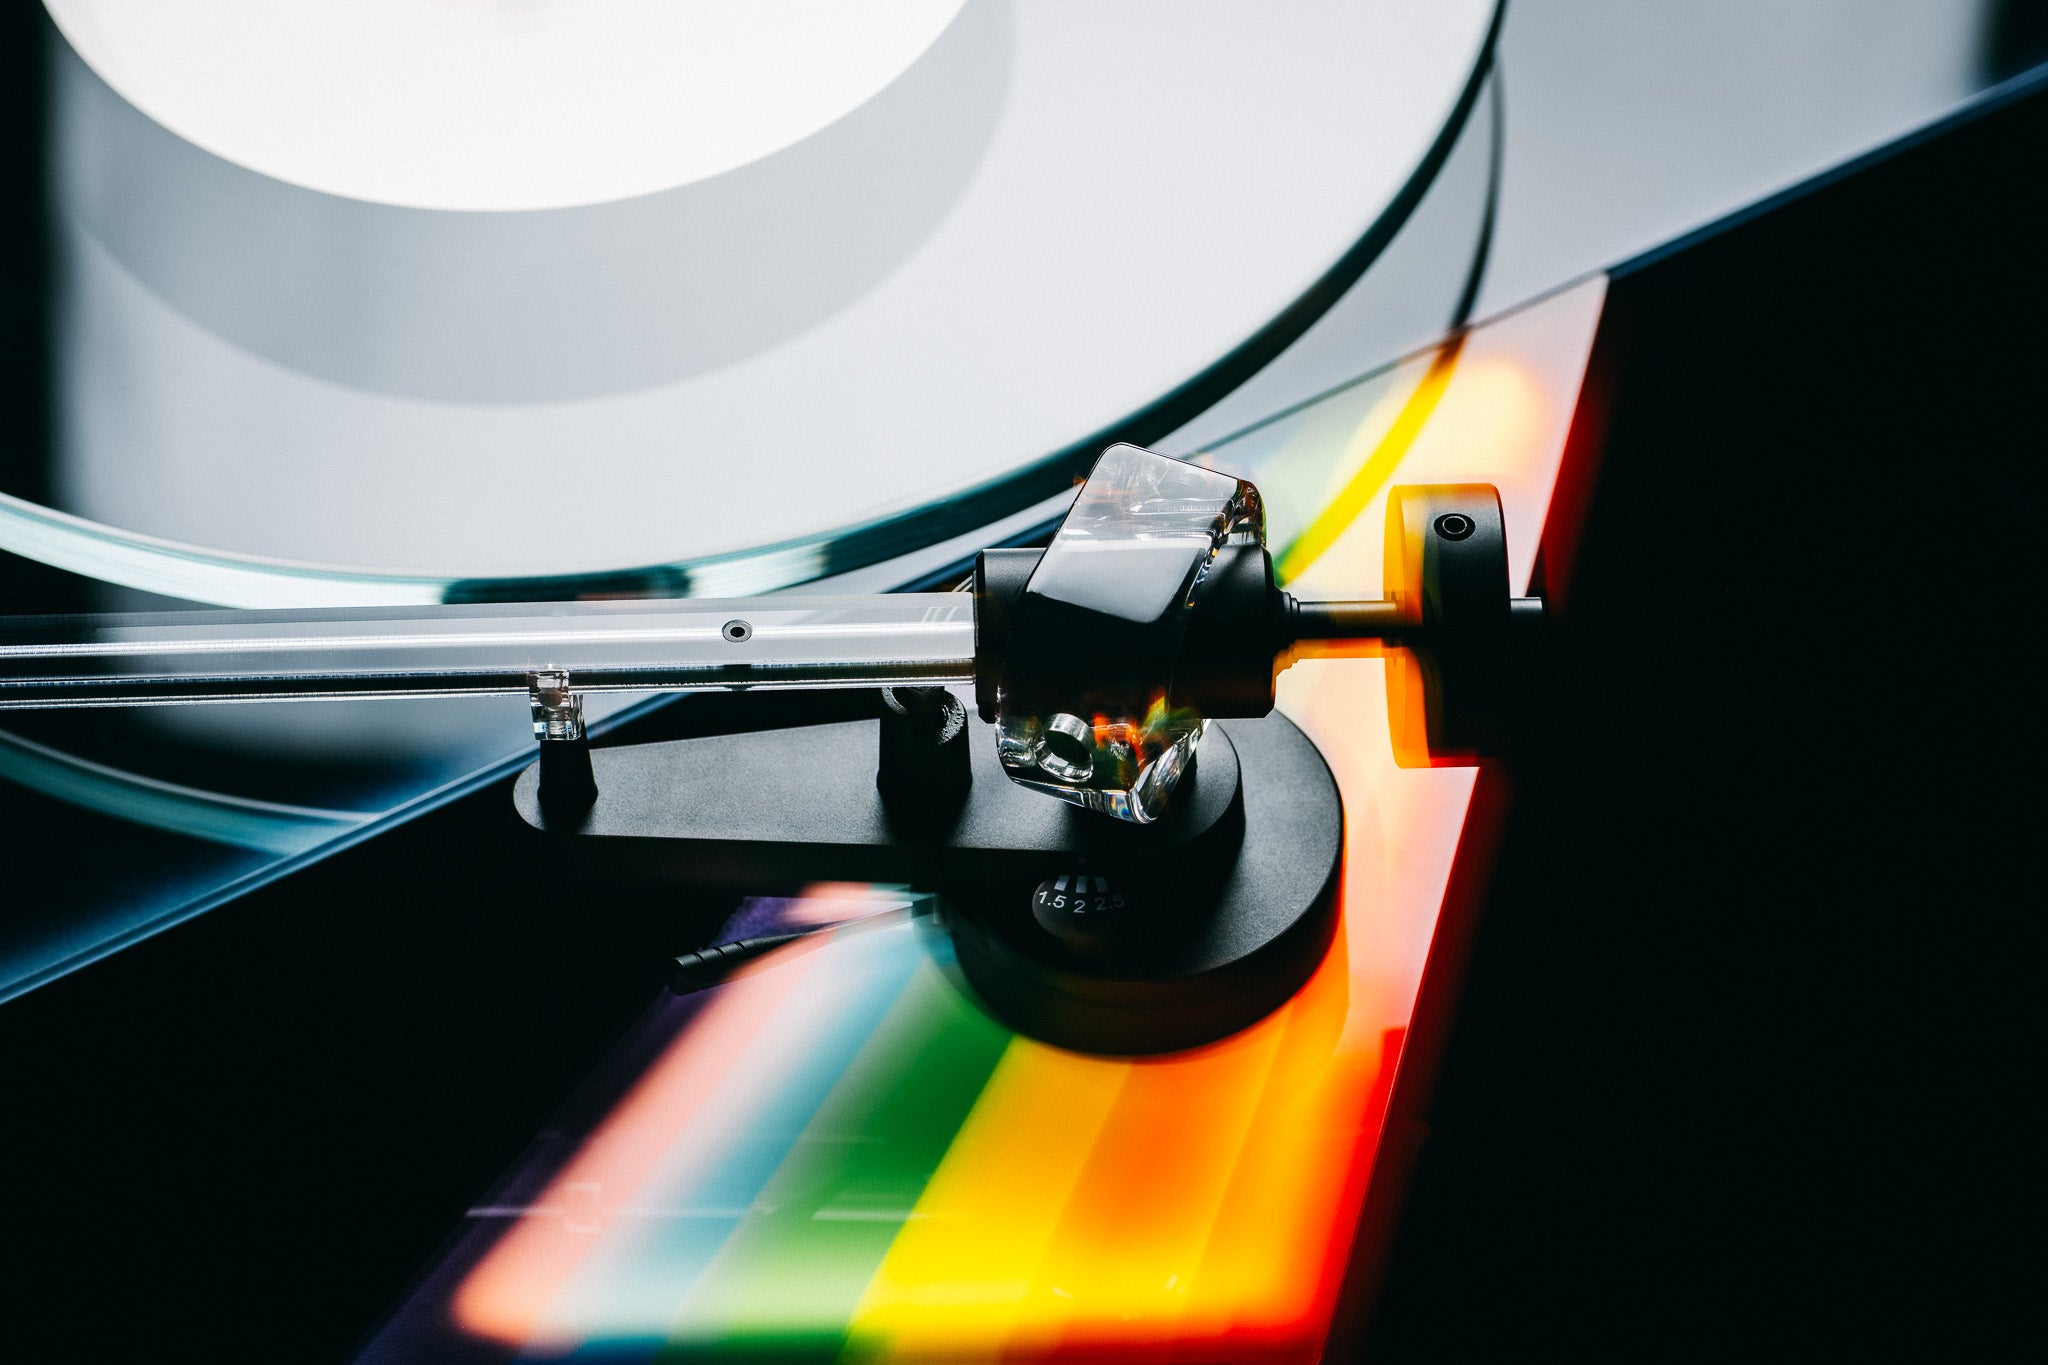 Pro-Ject The Dark Side of Moon levysoitin